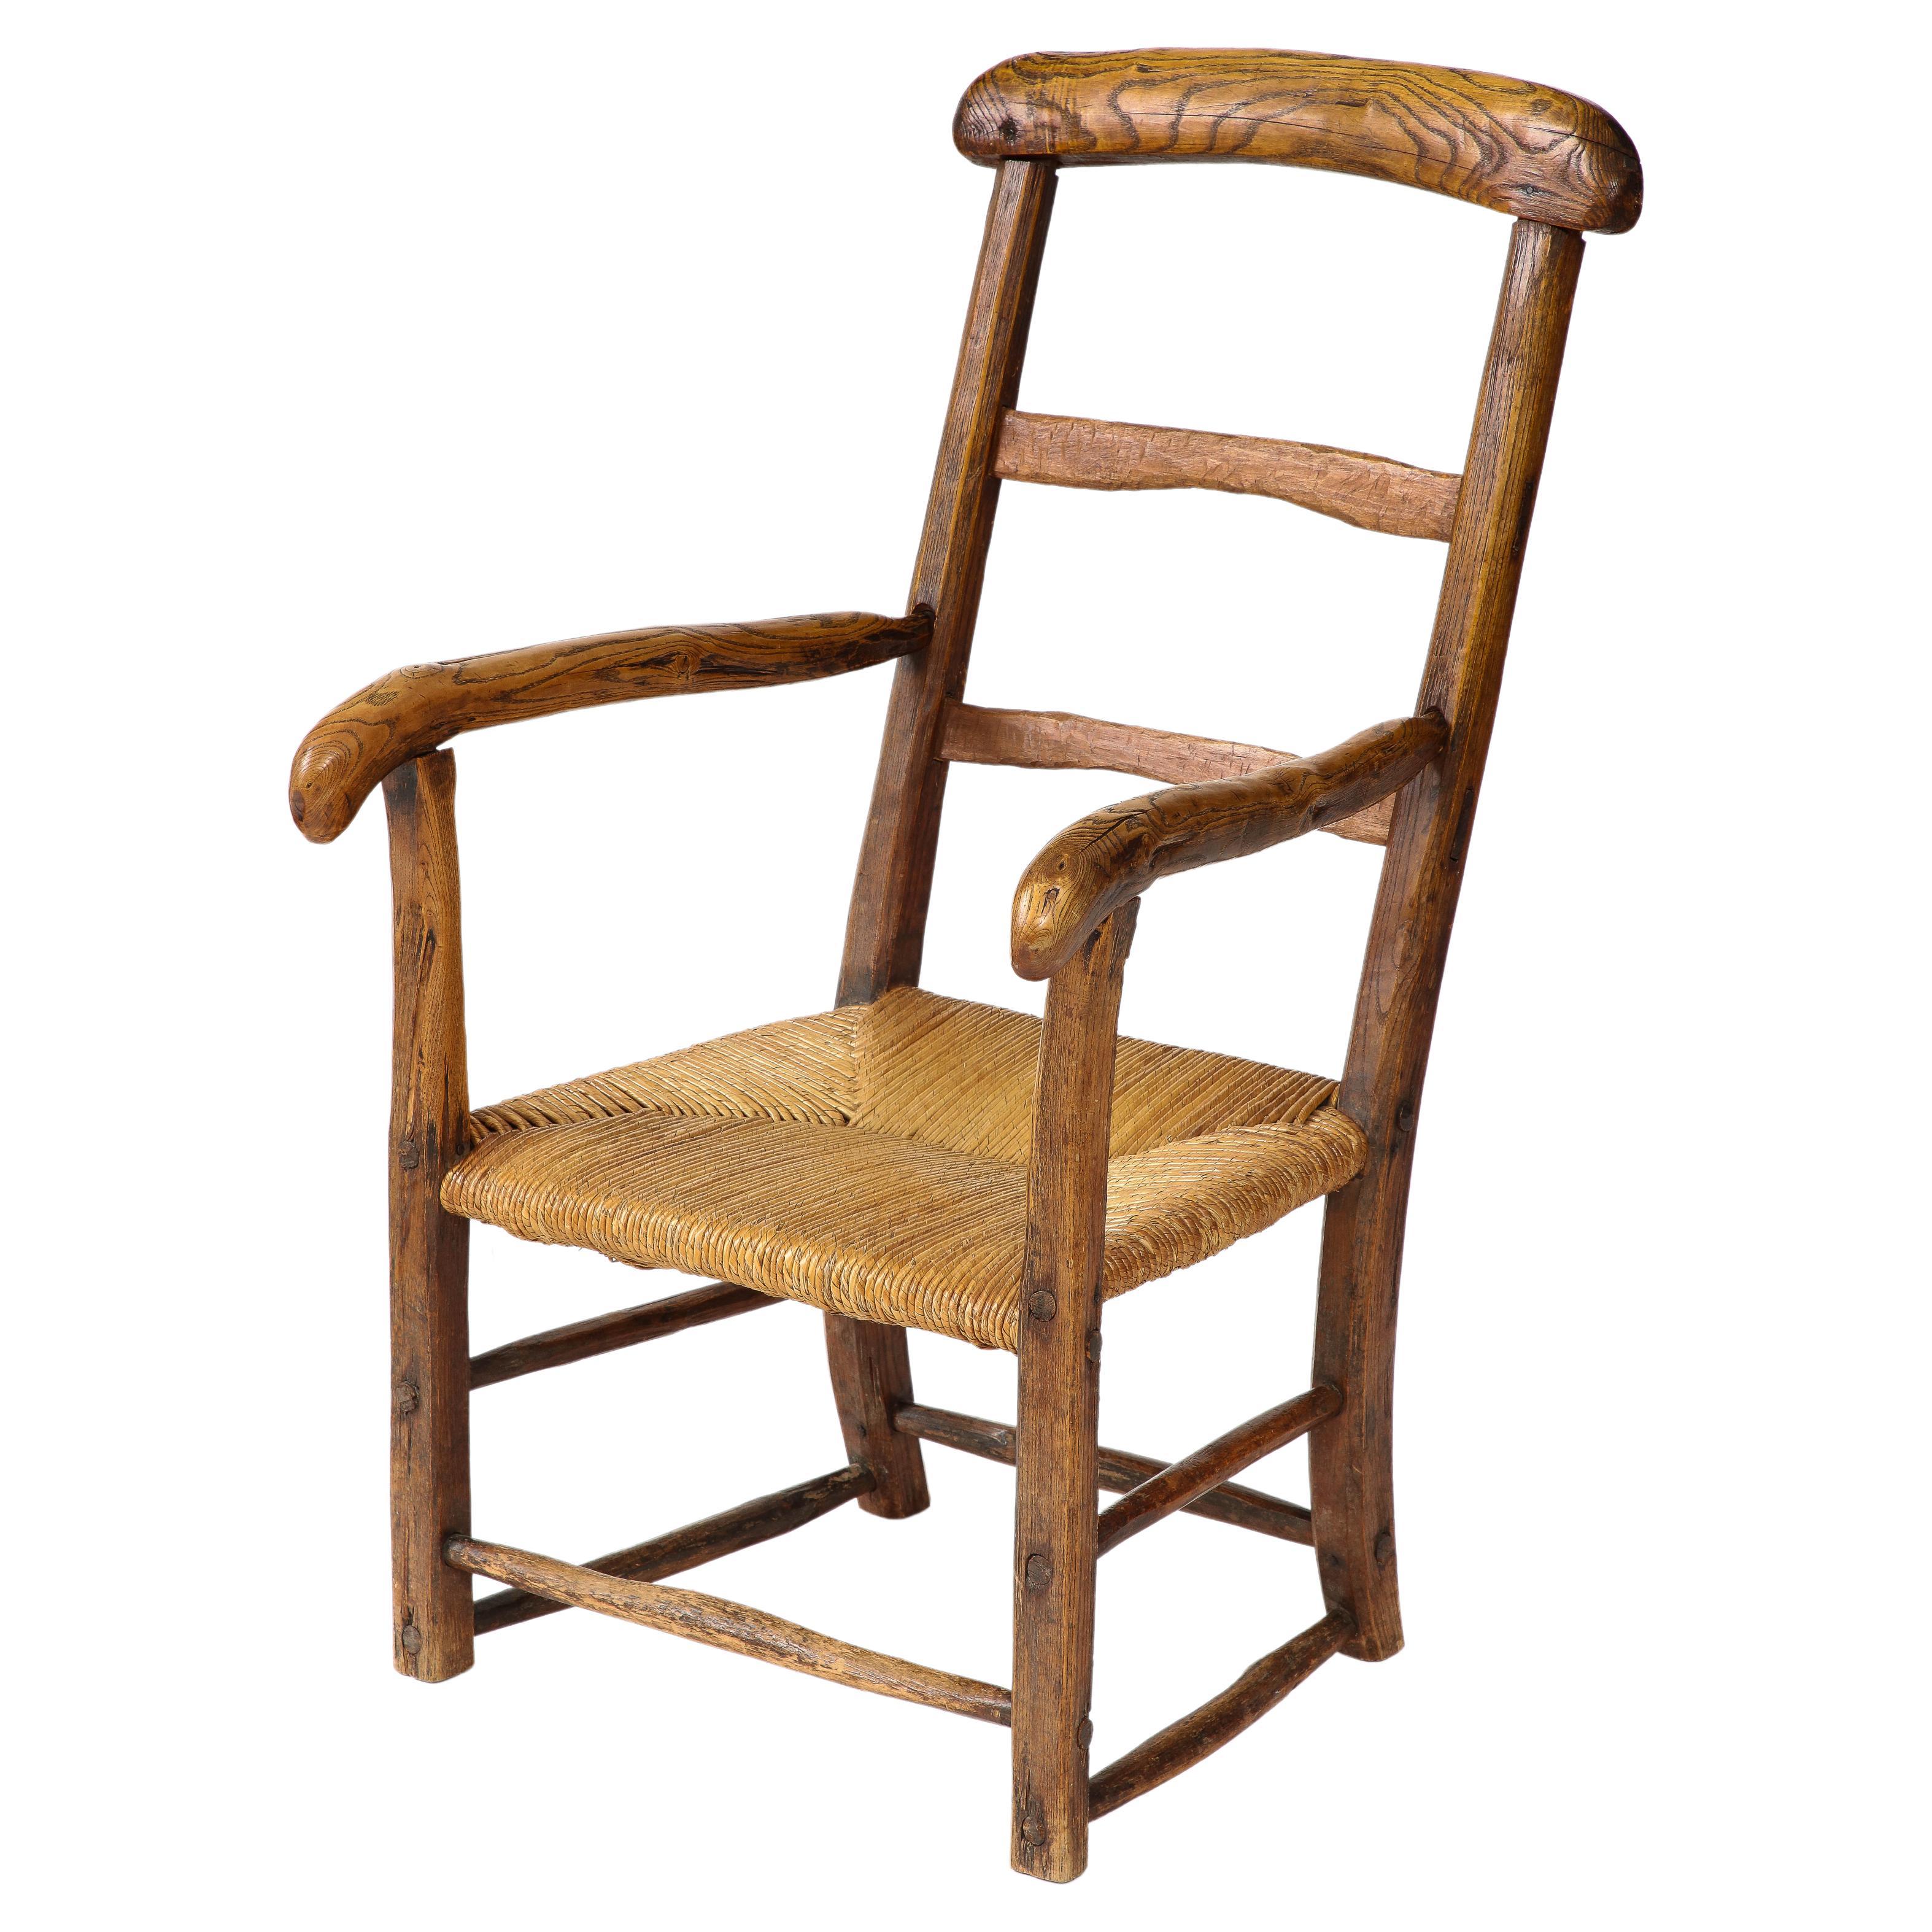 19th Century Rustic French Chair with Straw Seat